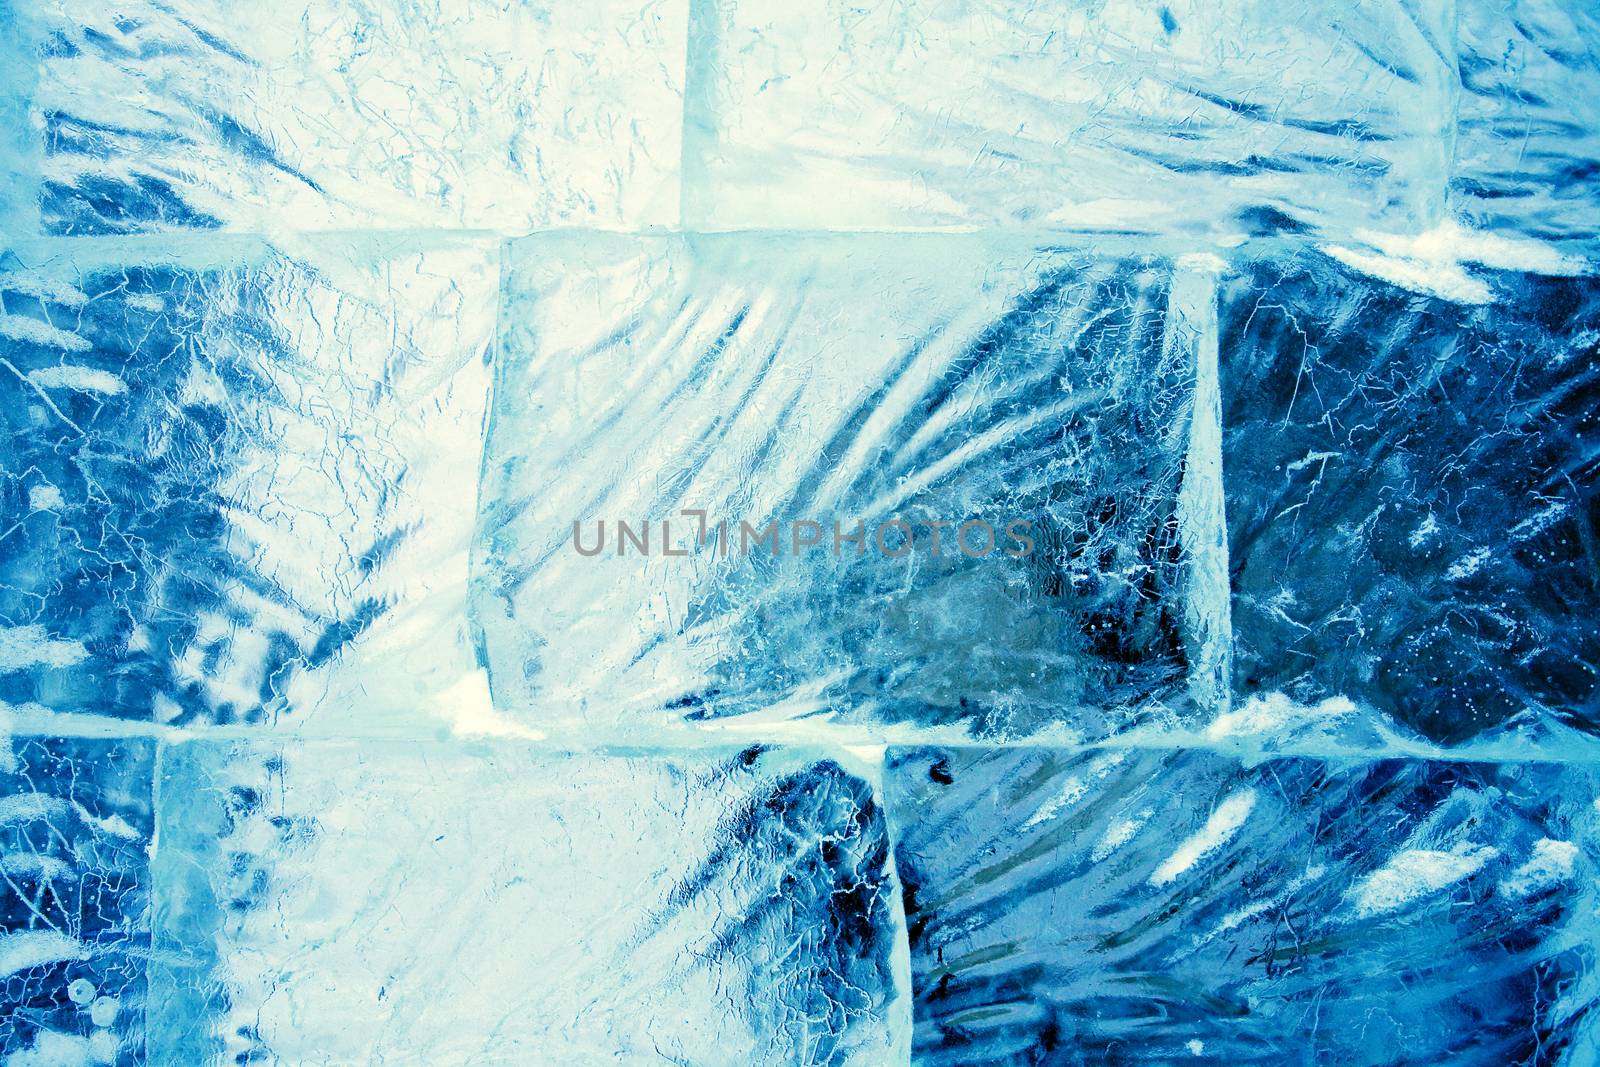 Nice abstract blue background made from clean blue ice bricks